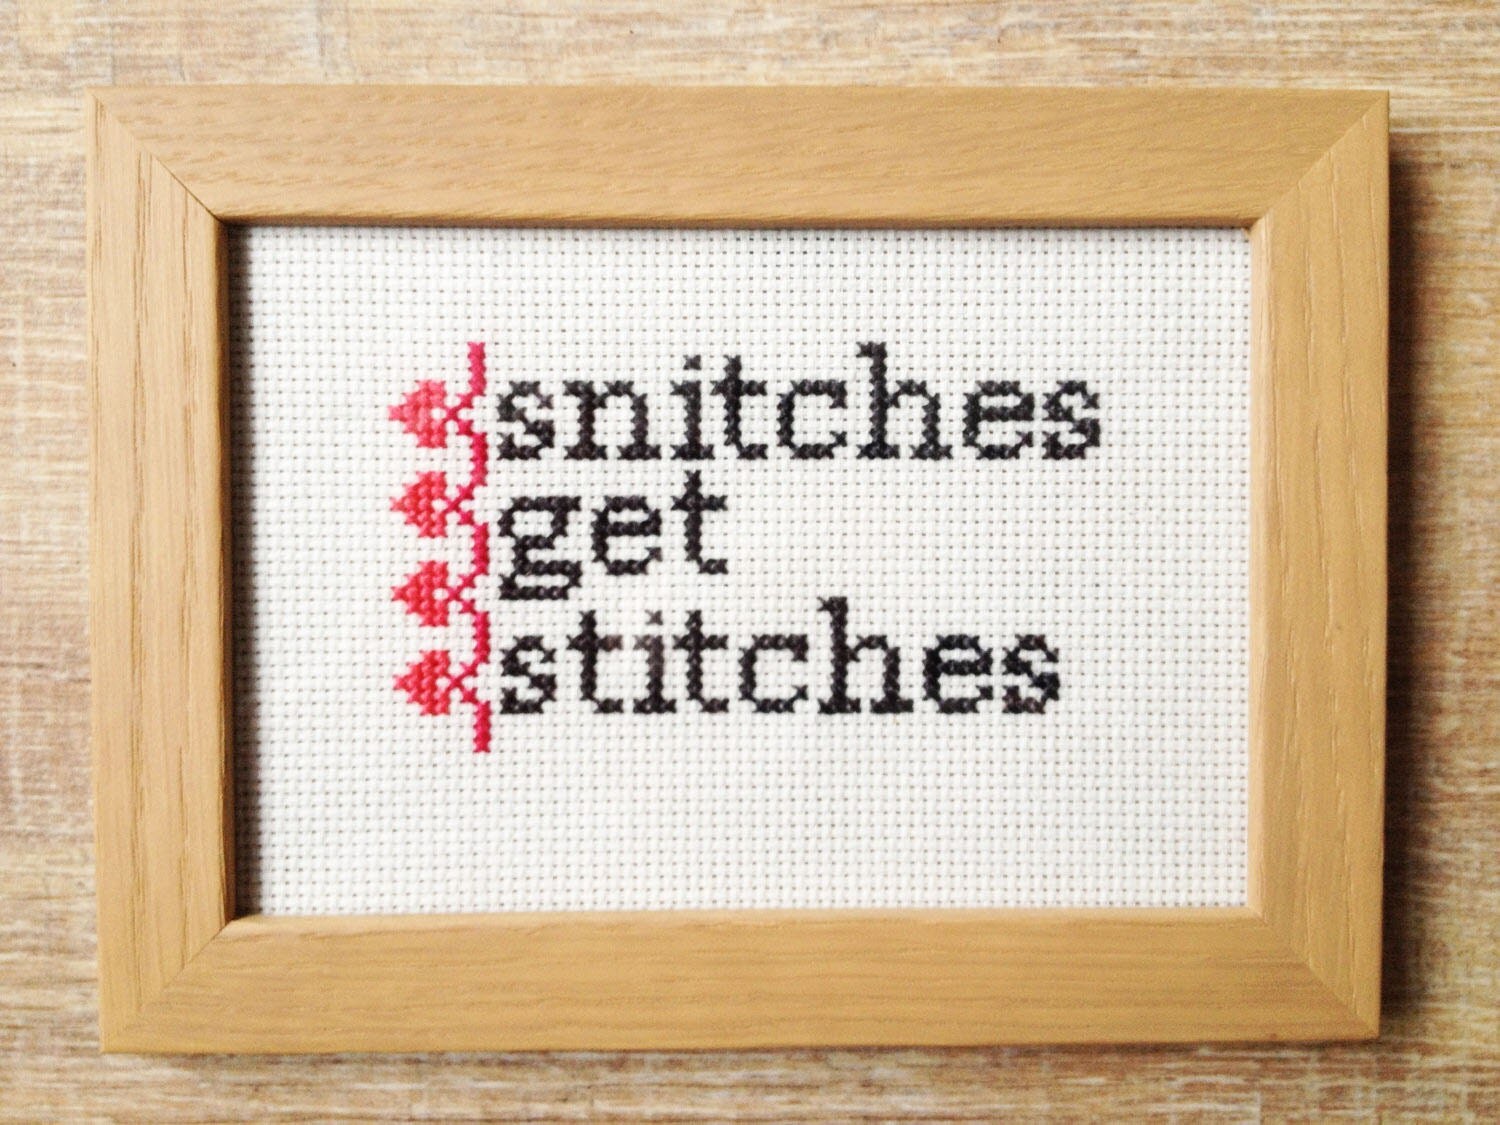 Snitch Quotes For Snitches. QuotesGram